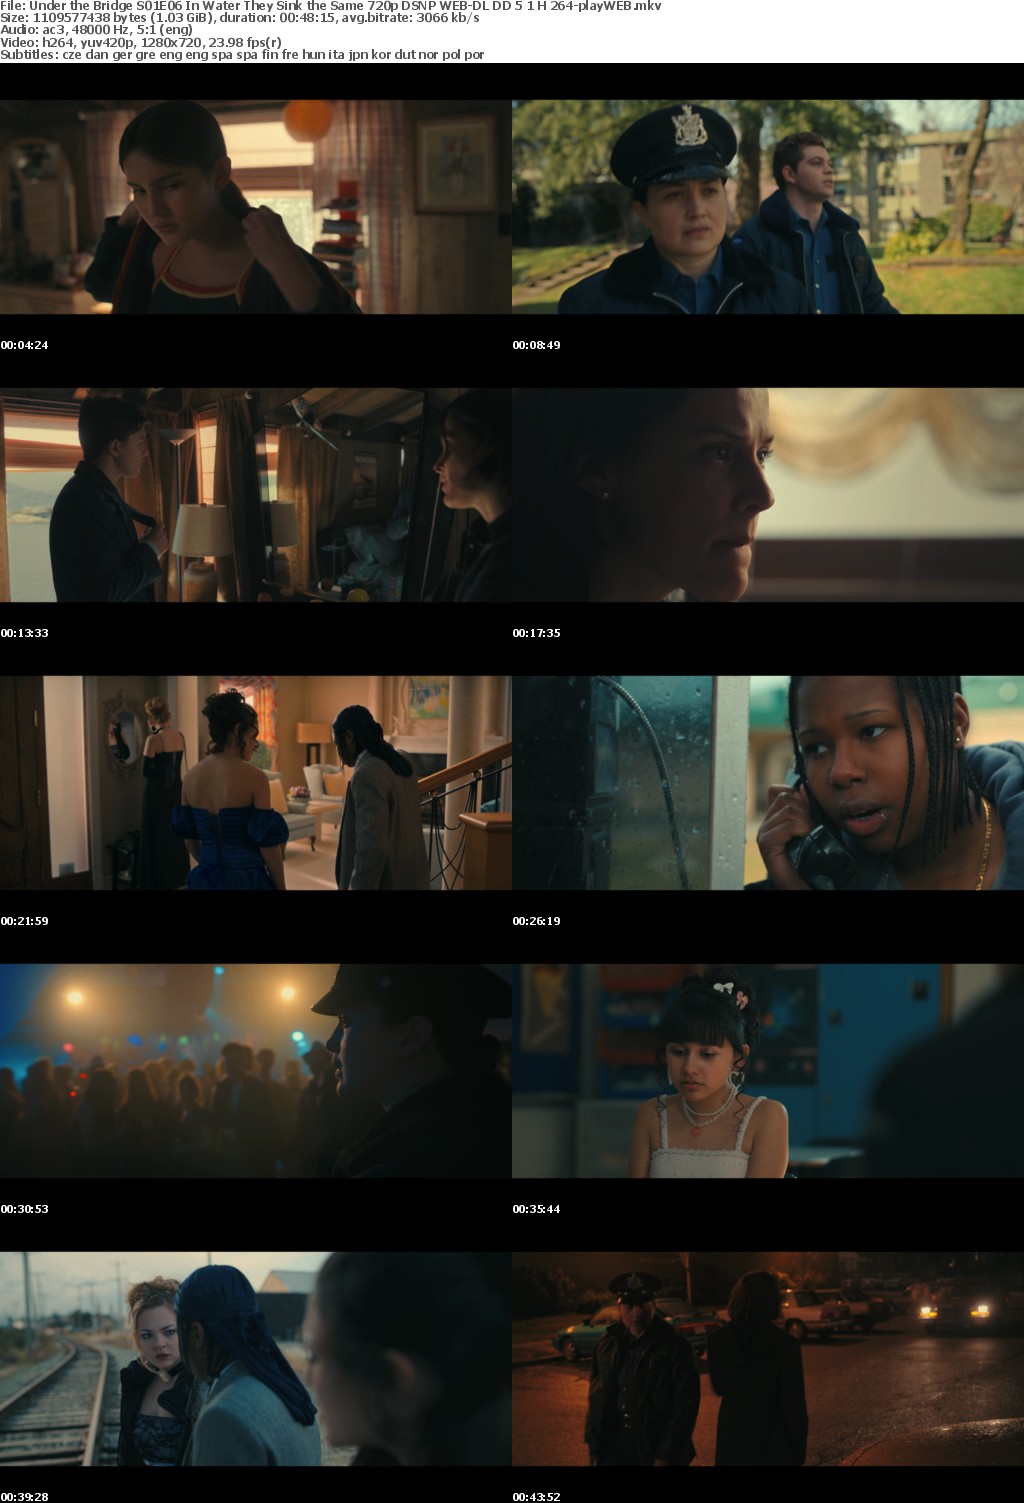 Under the Bridge S01E06 In Water They Sink the Same 720p DSNP WEB-DL DD 5 1 H 264-playWEB